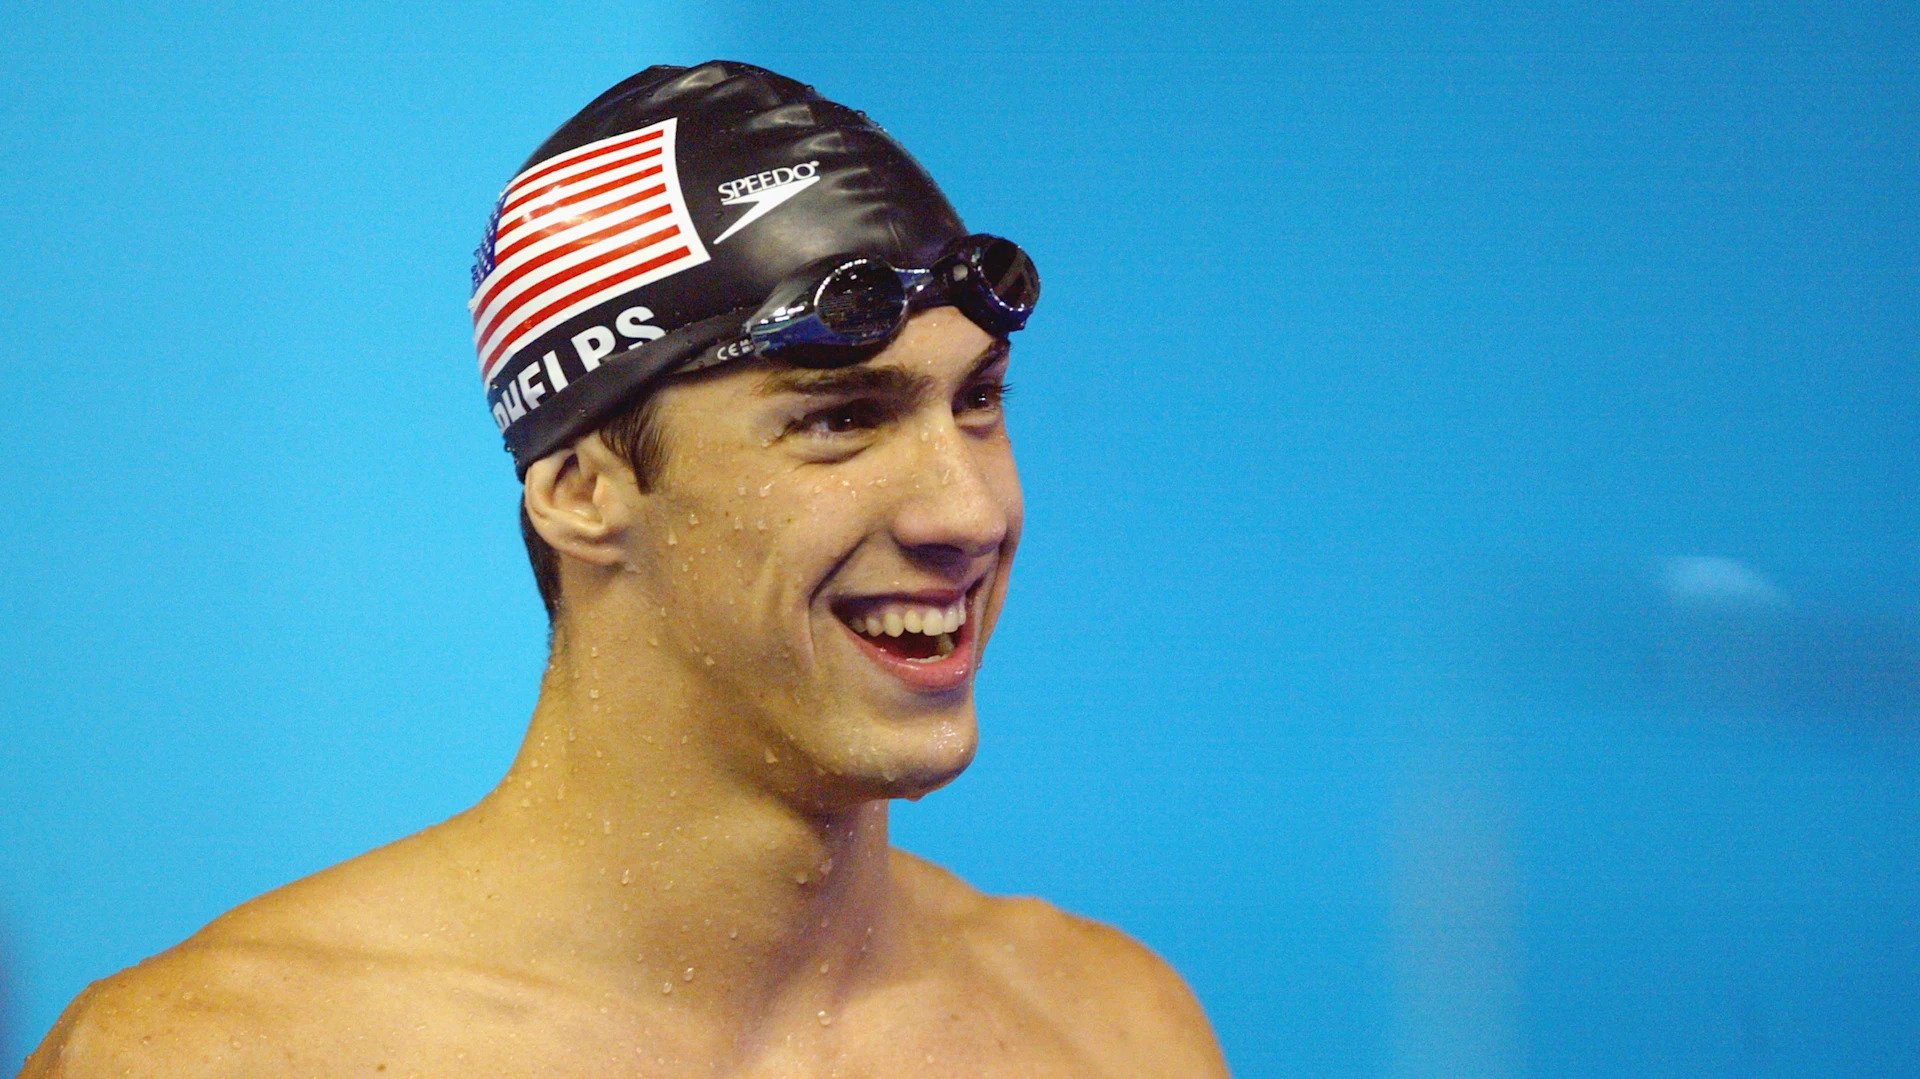 44-facts-about-michael-phelps